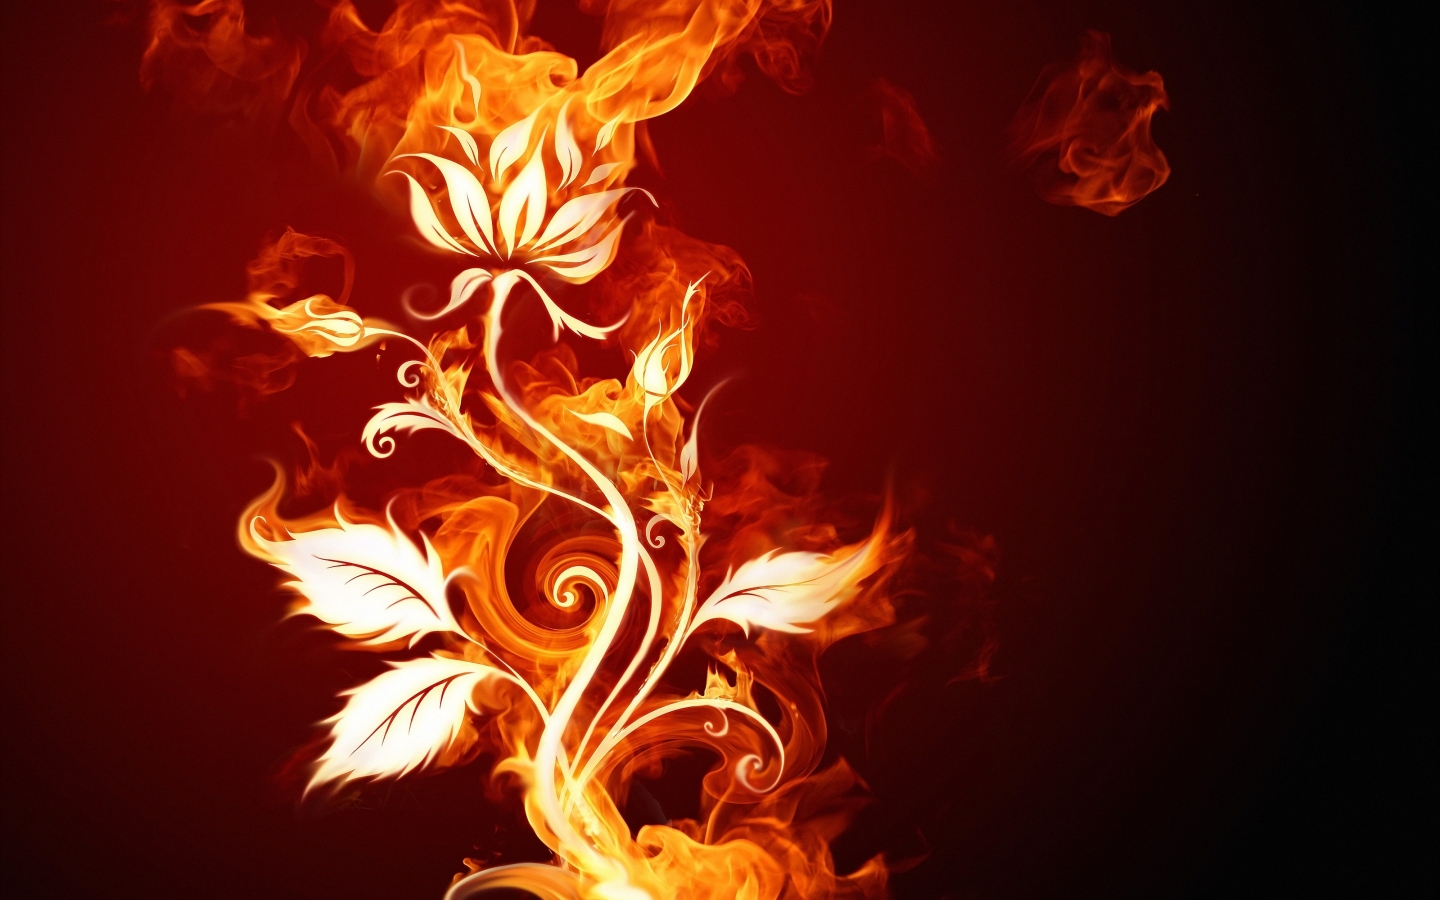 Burning Flower for 1440 x 900 widescreen resolution